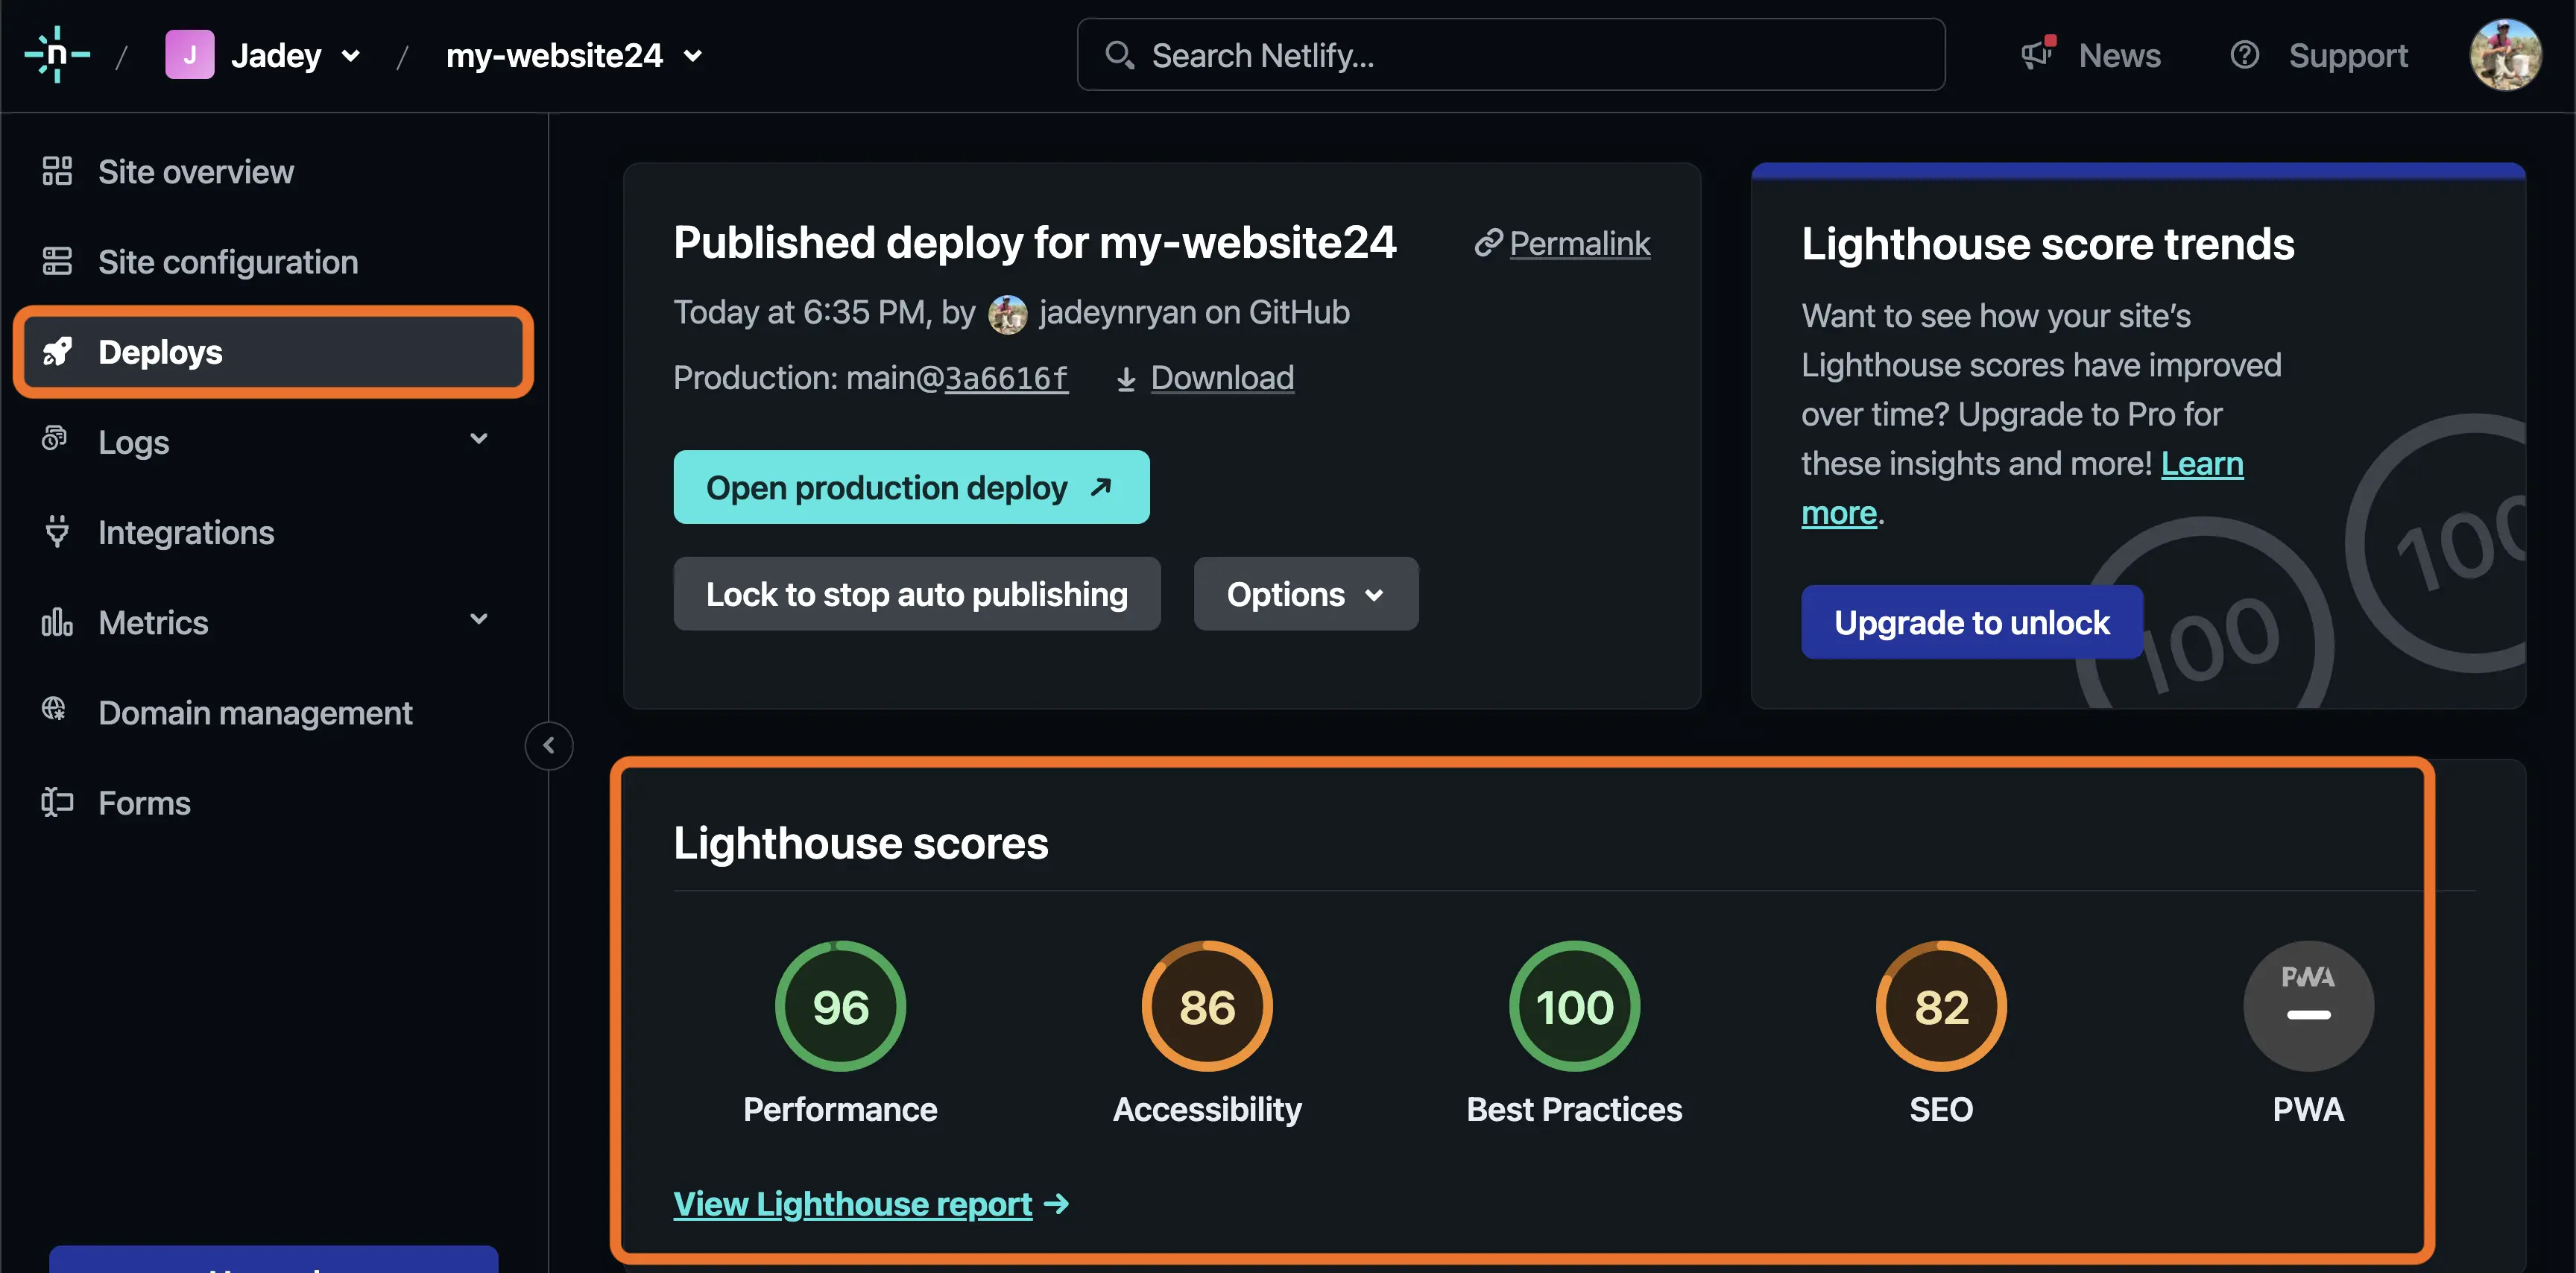 Netlify deploys page with box around Lighthouse scores for performance (score of 96), accessibility (score of 86), best practices (score of 100), and SEO (score of 82).